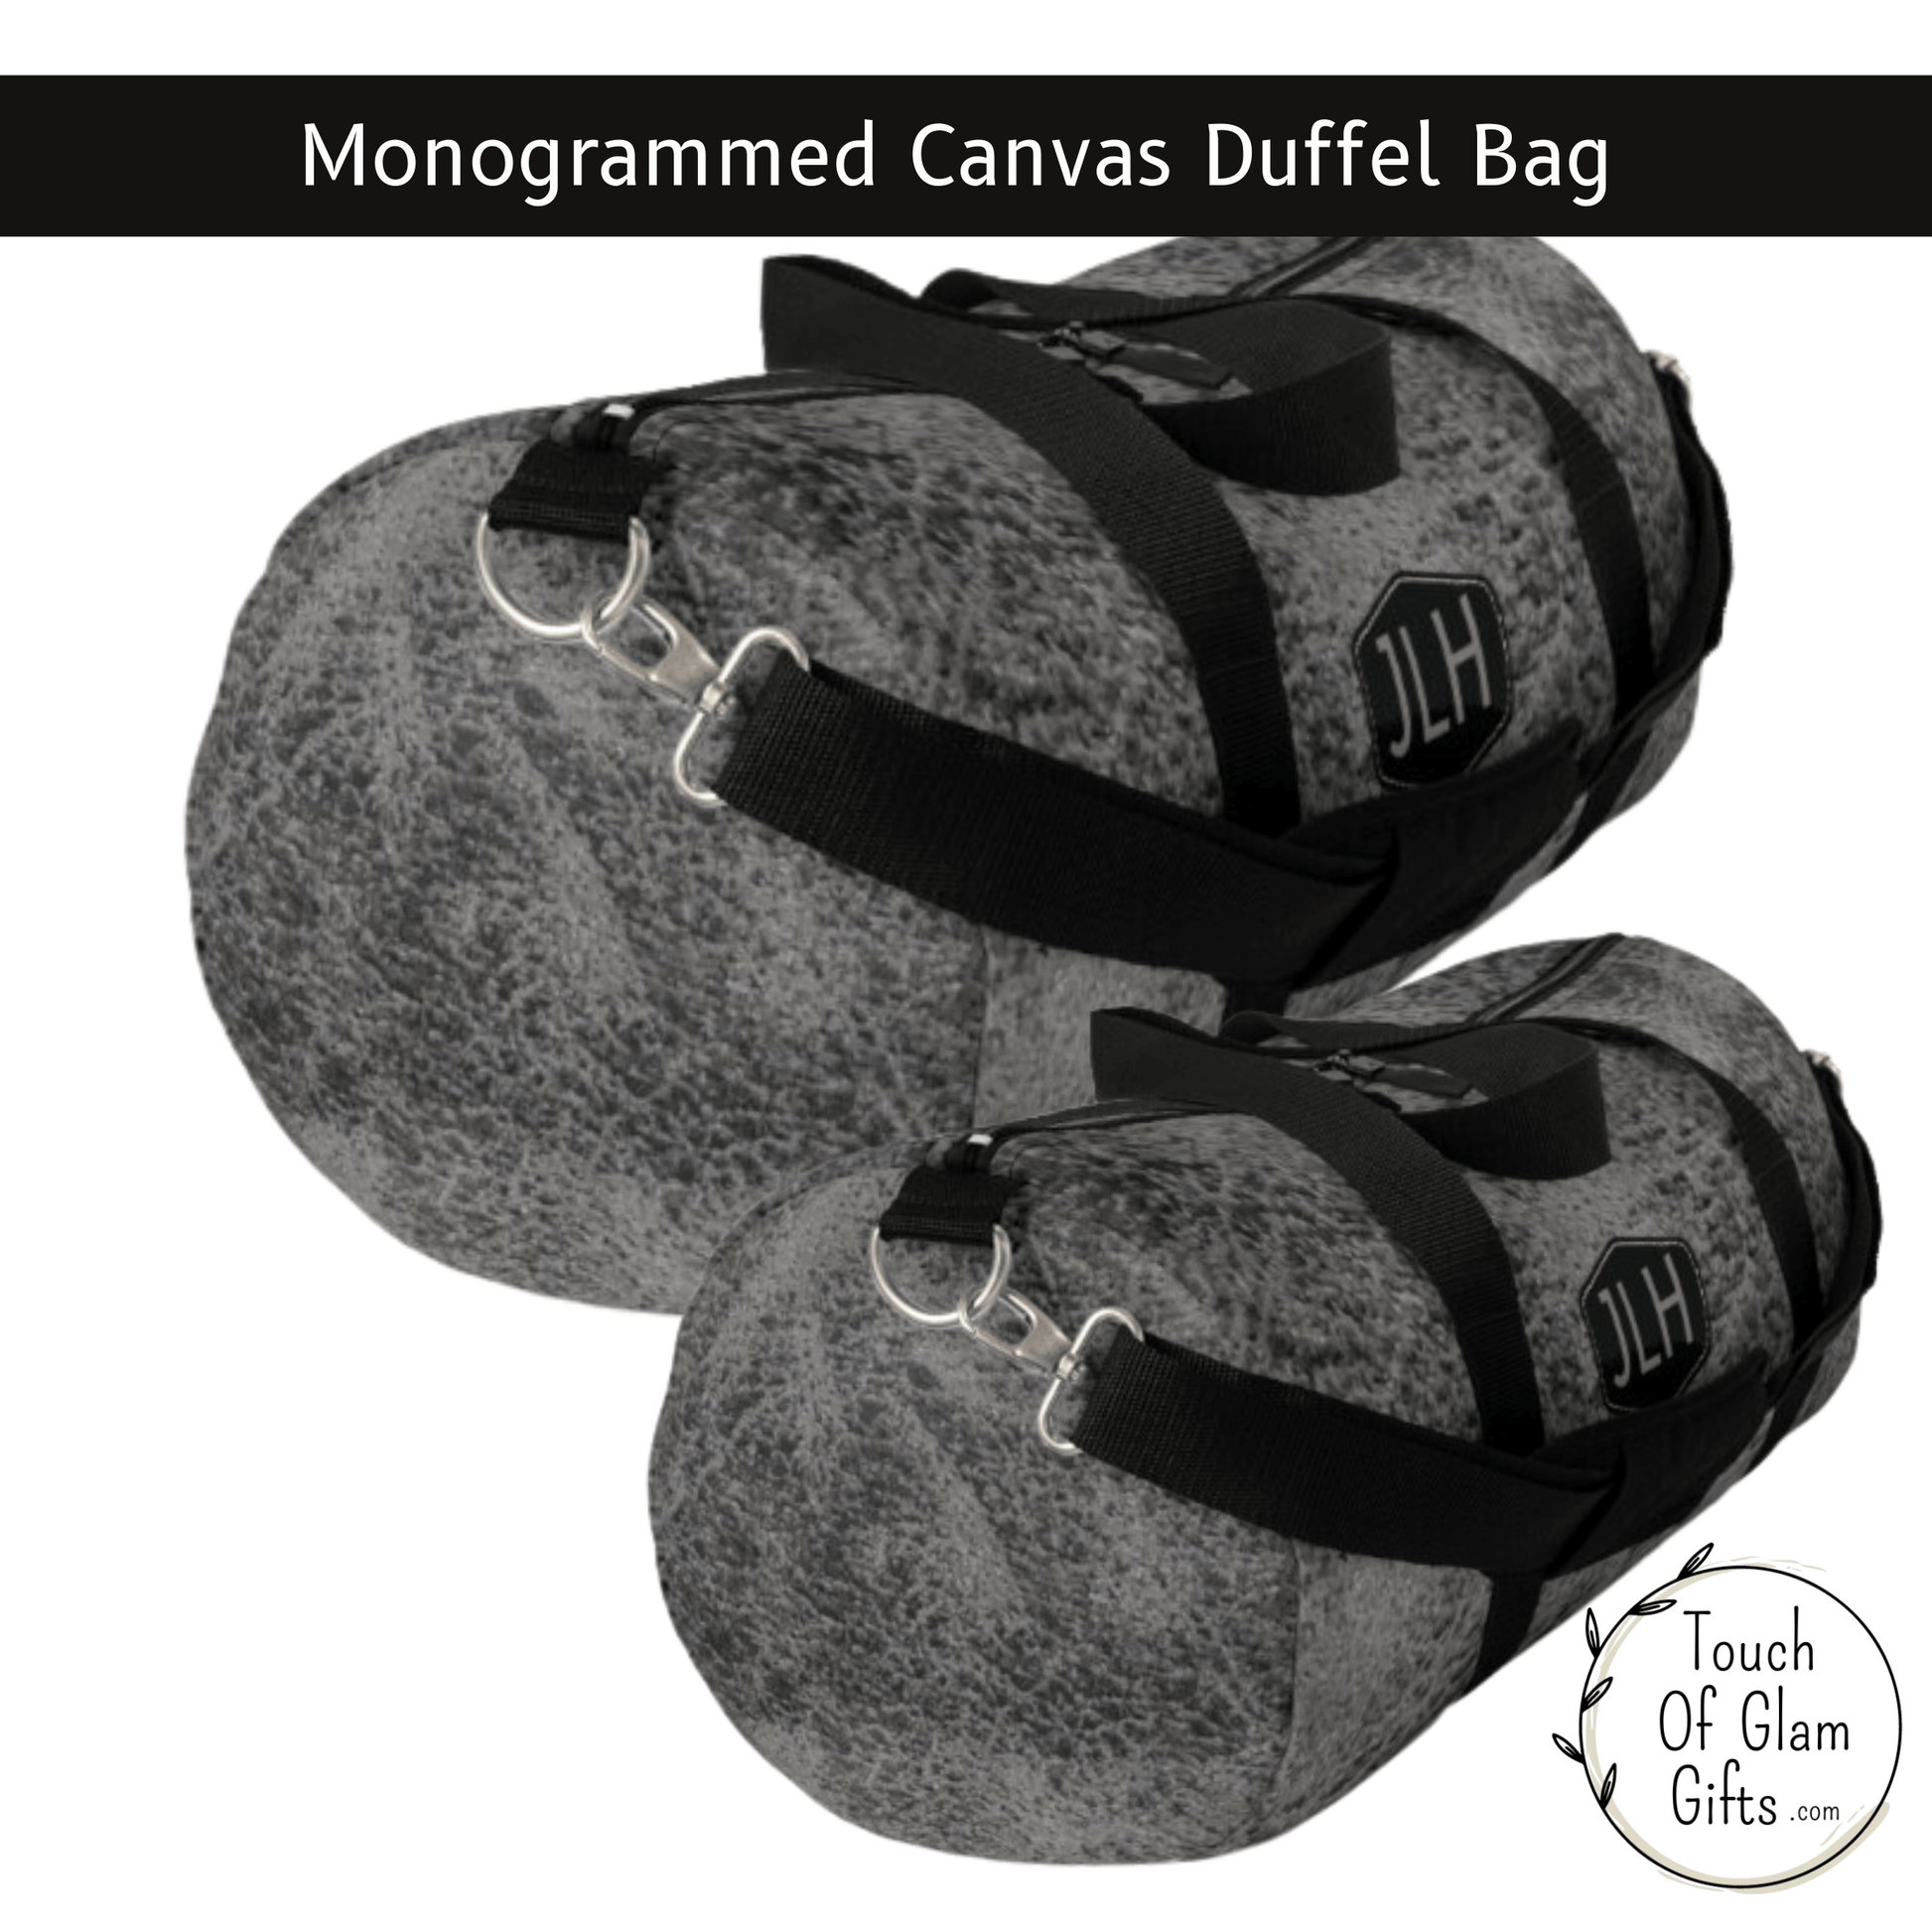 A view of the sides shows grey weathered print on canvas duffel bag with monogrammed initials and the black handles and black shoulder strap with metal hardware.